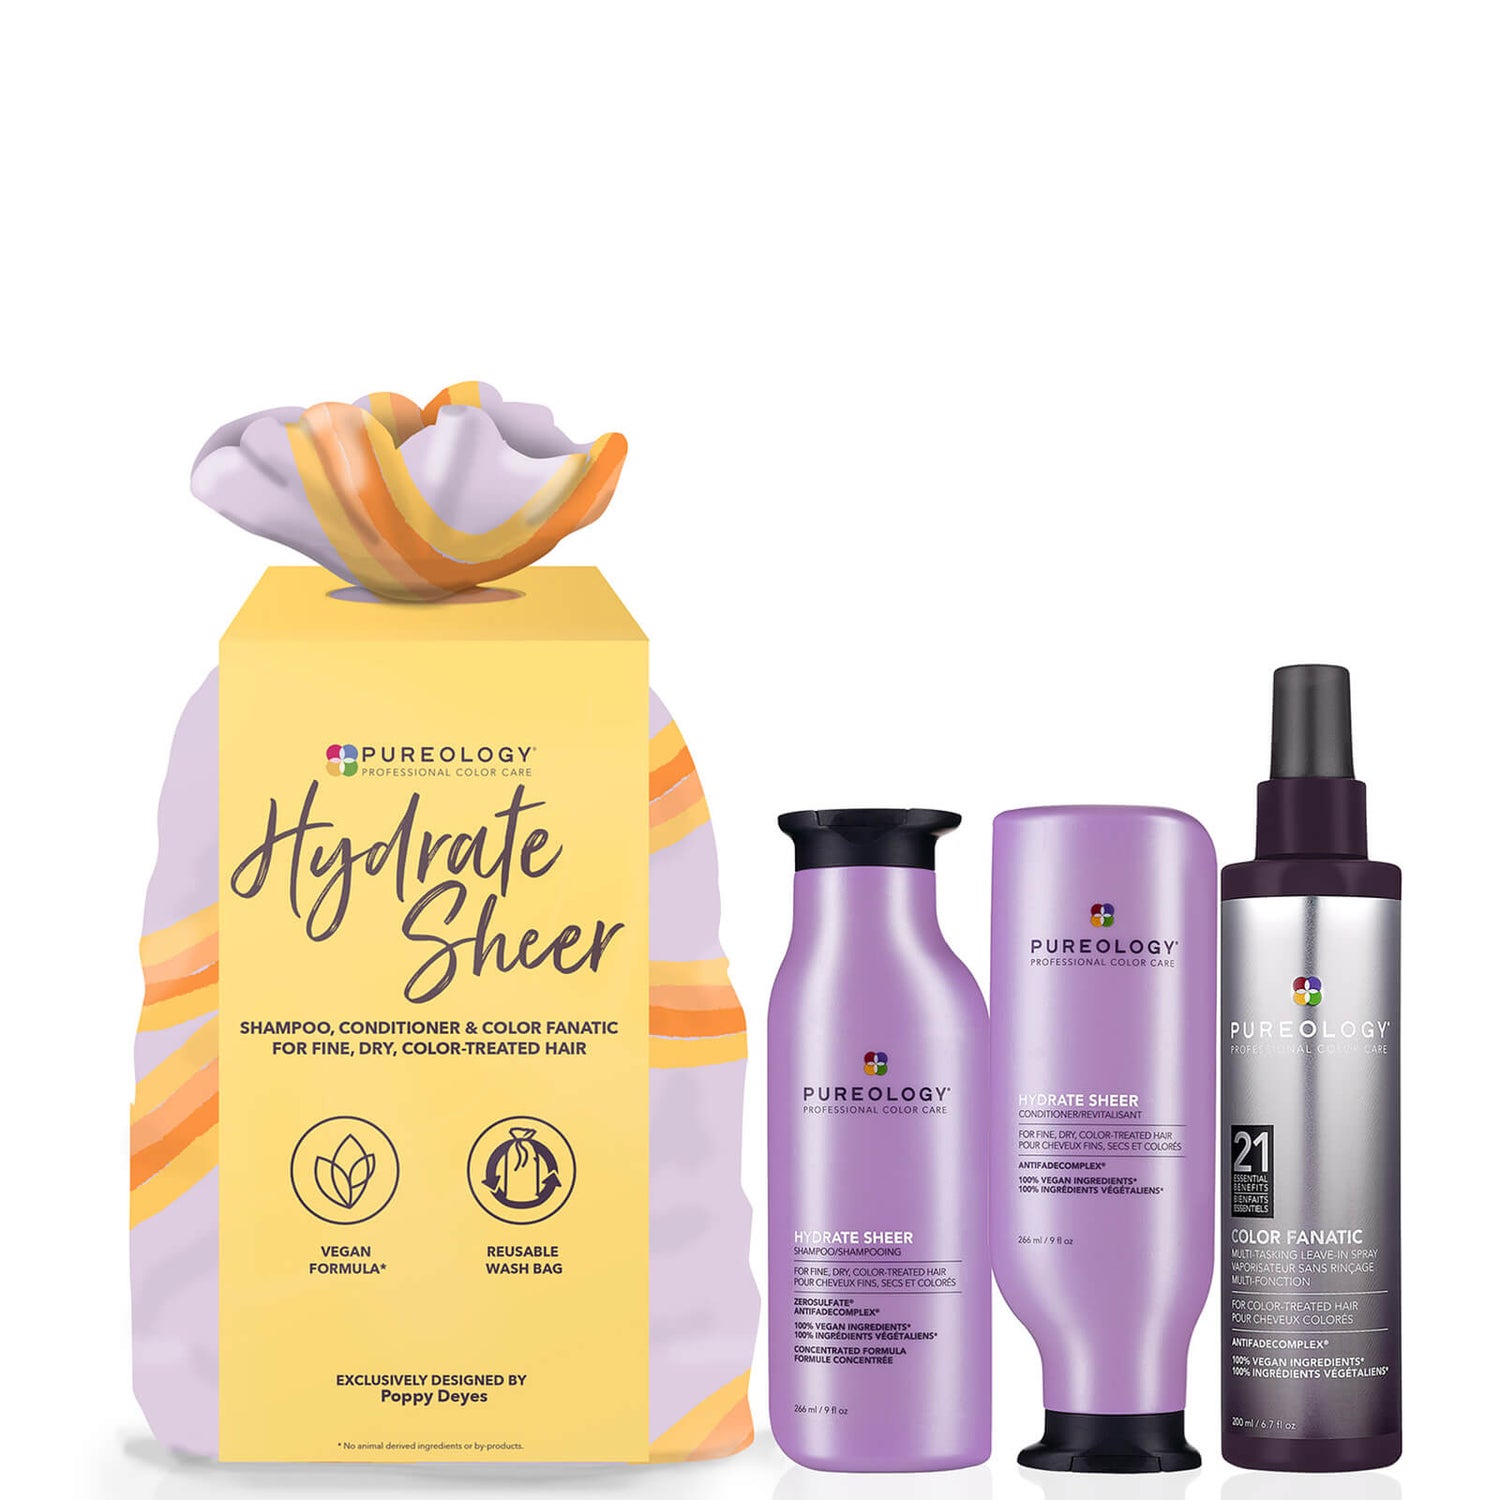 Pureology Hydrate Sheer and Colour Fanatic Set (Worth £72.35)